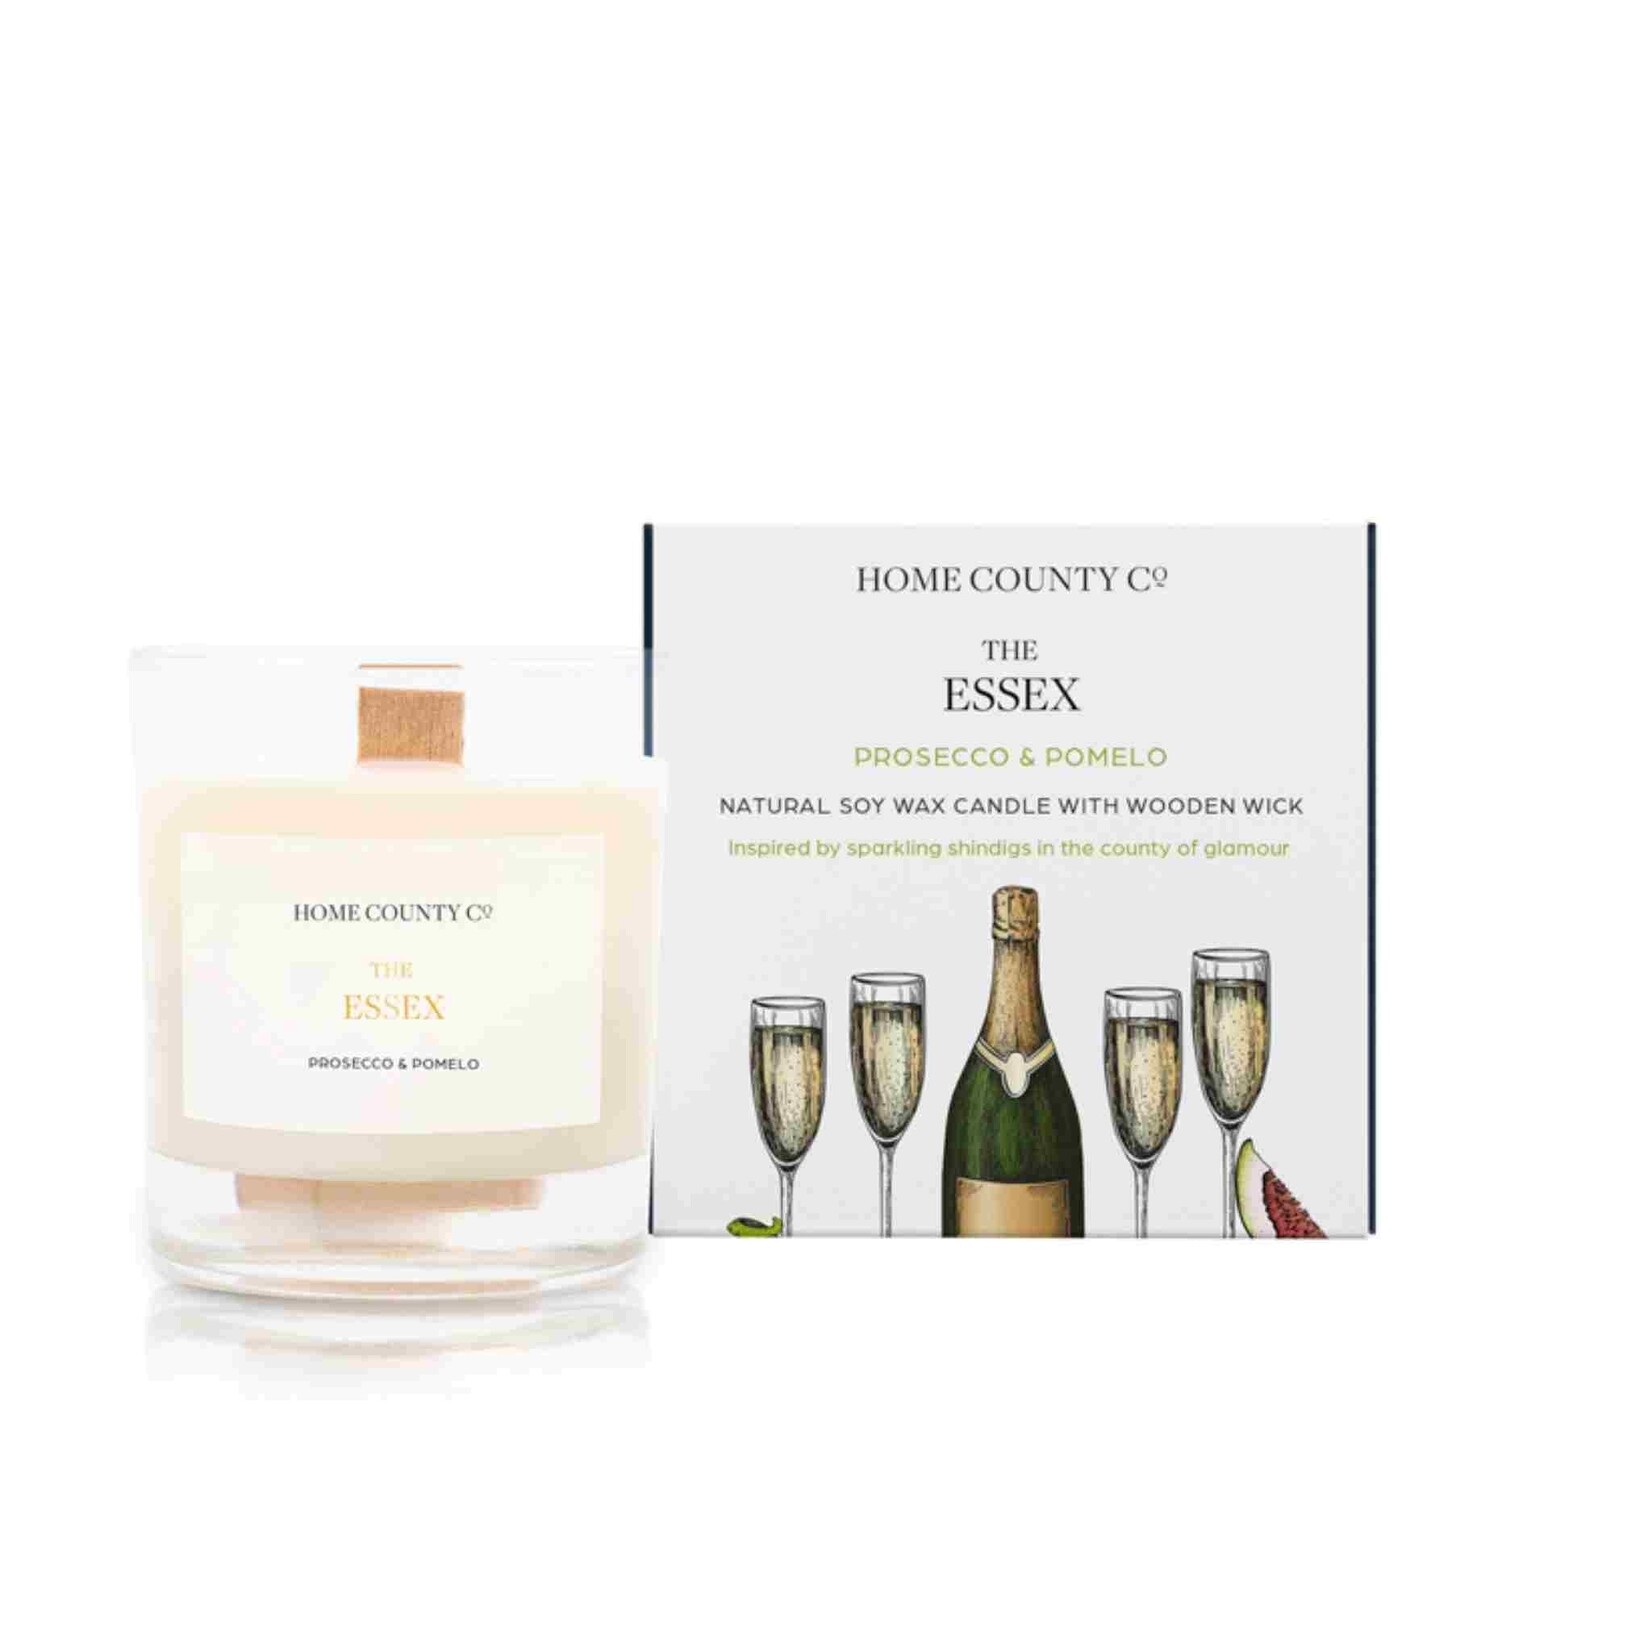 Home County Co. British Soy Candles